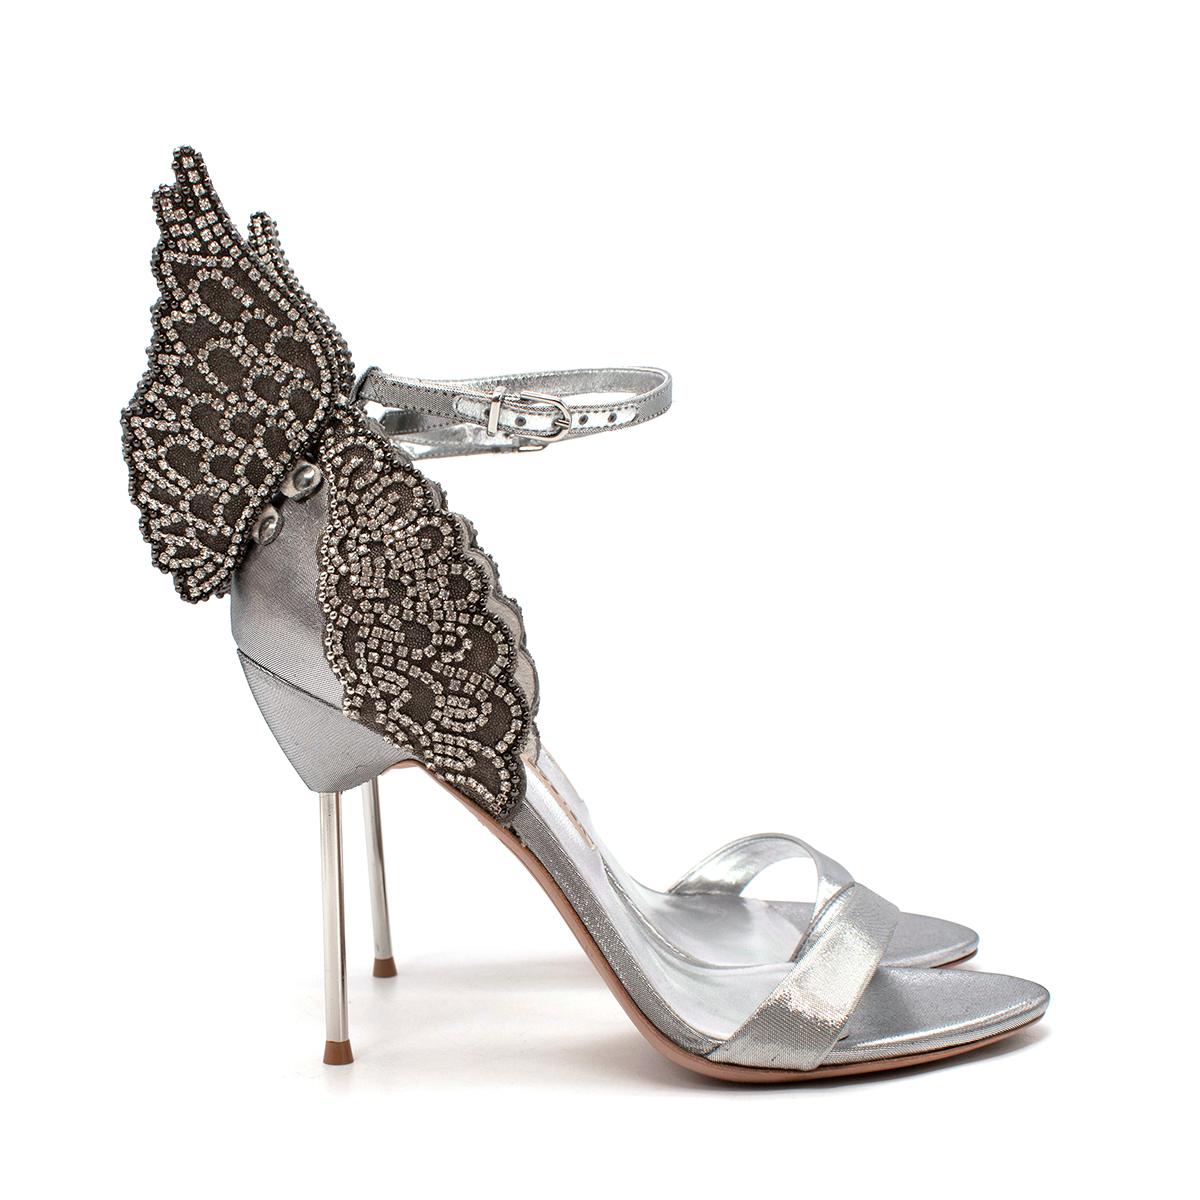 Sophia Webster Silver Evangeline Butterfly 100 Sandals

-These silver Sophia Webster Evangeline leather butterfly sandals will have you seventh heaven.
-These shoes have been fabricated from metallic silver leather and feature an open round toe, an